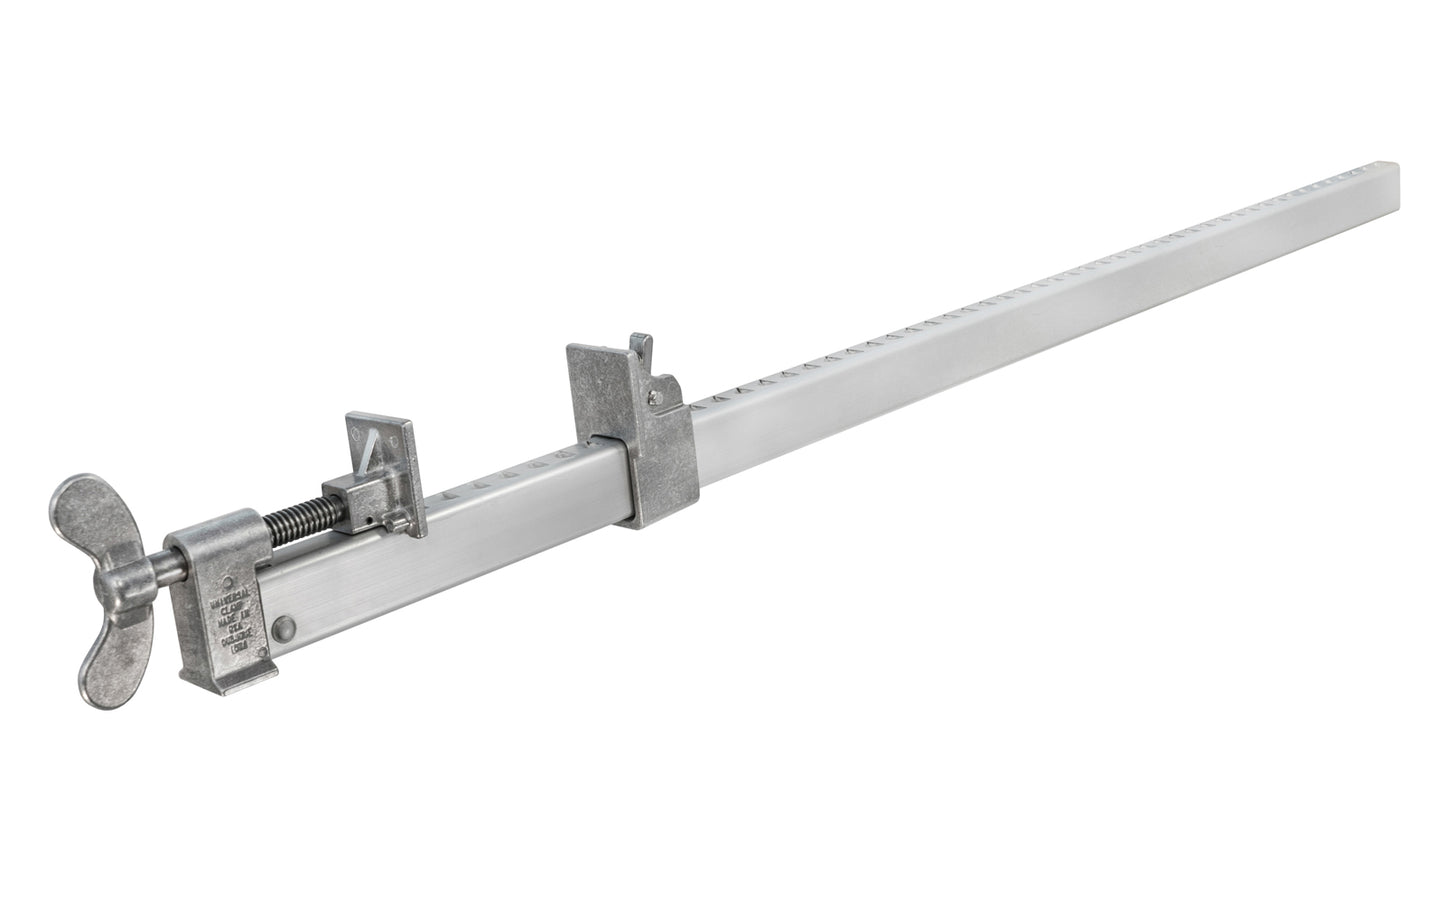 36" Aluminum Bar Clamp is strong, rigid & lightweight. Spring-action jaw easily moves for fast adjustment on notched bar, & clamp has 1/2" diameter Acme-threaded screw with wing knob. Strong extruded bar on clamp stays very straight when using under clamping pressure. Dubuque Model UC936. Miro Moose.  Made in USA. 099687009369